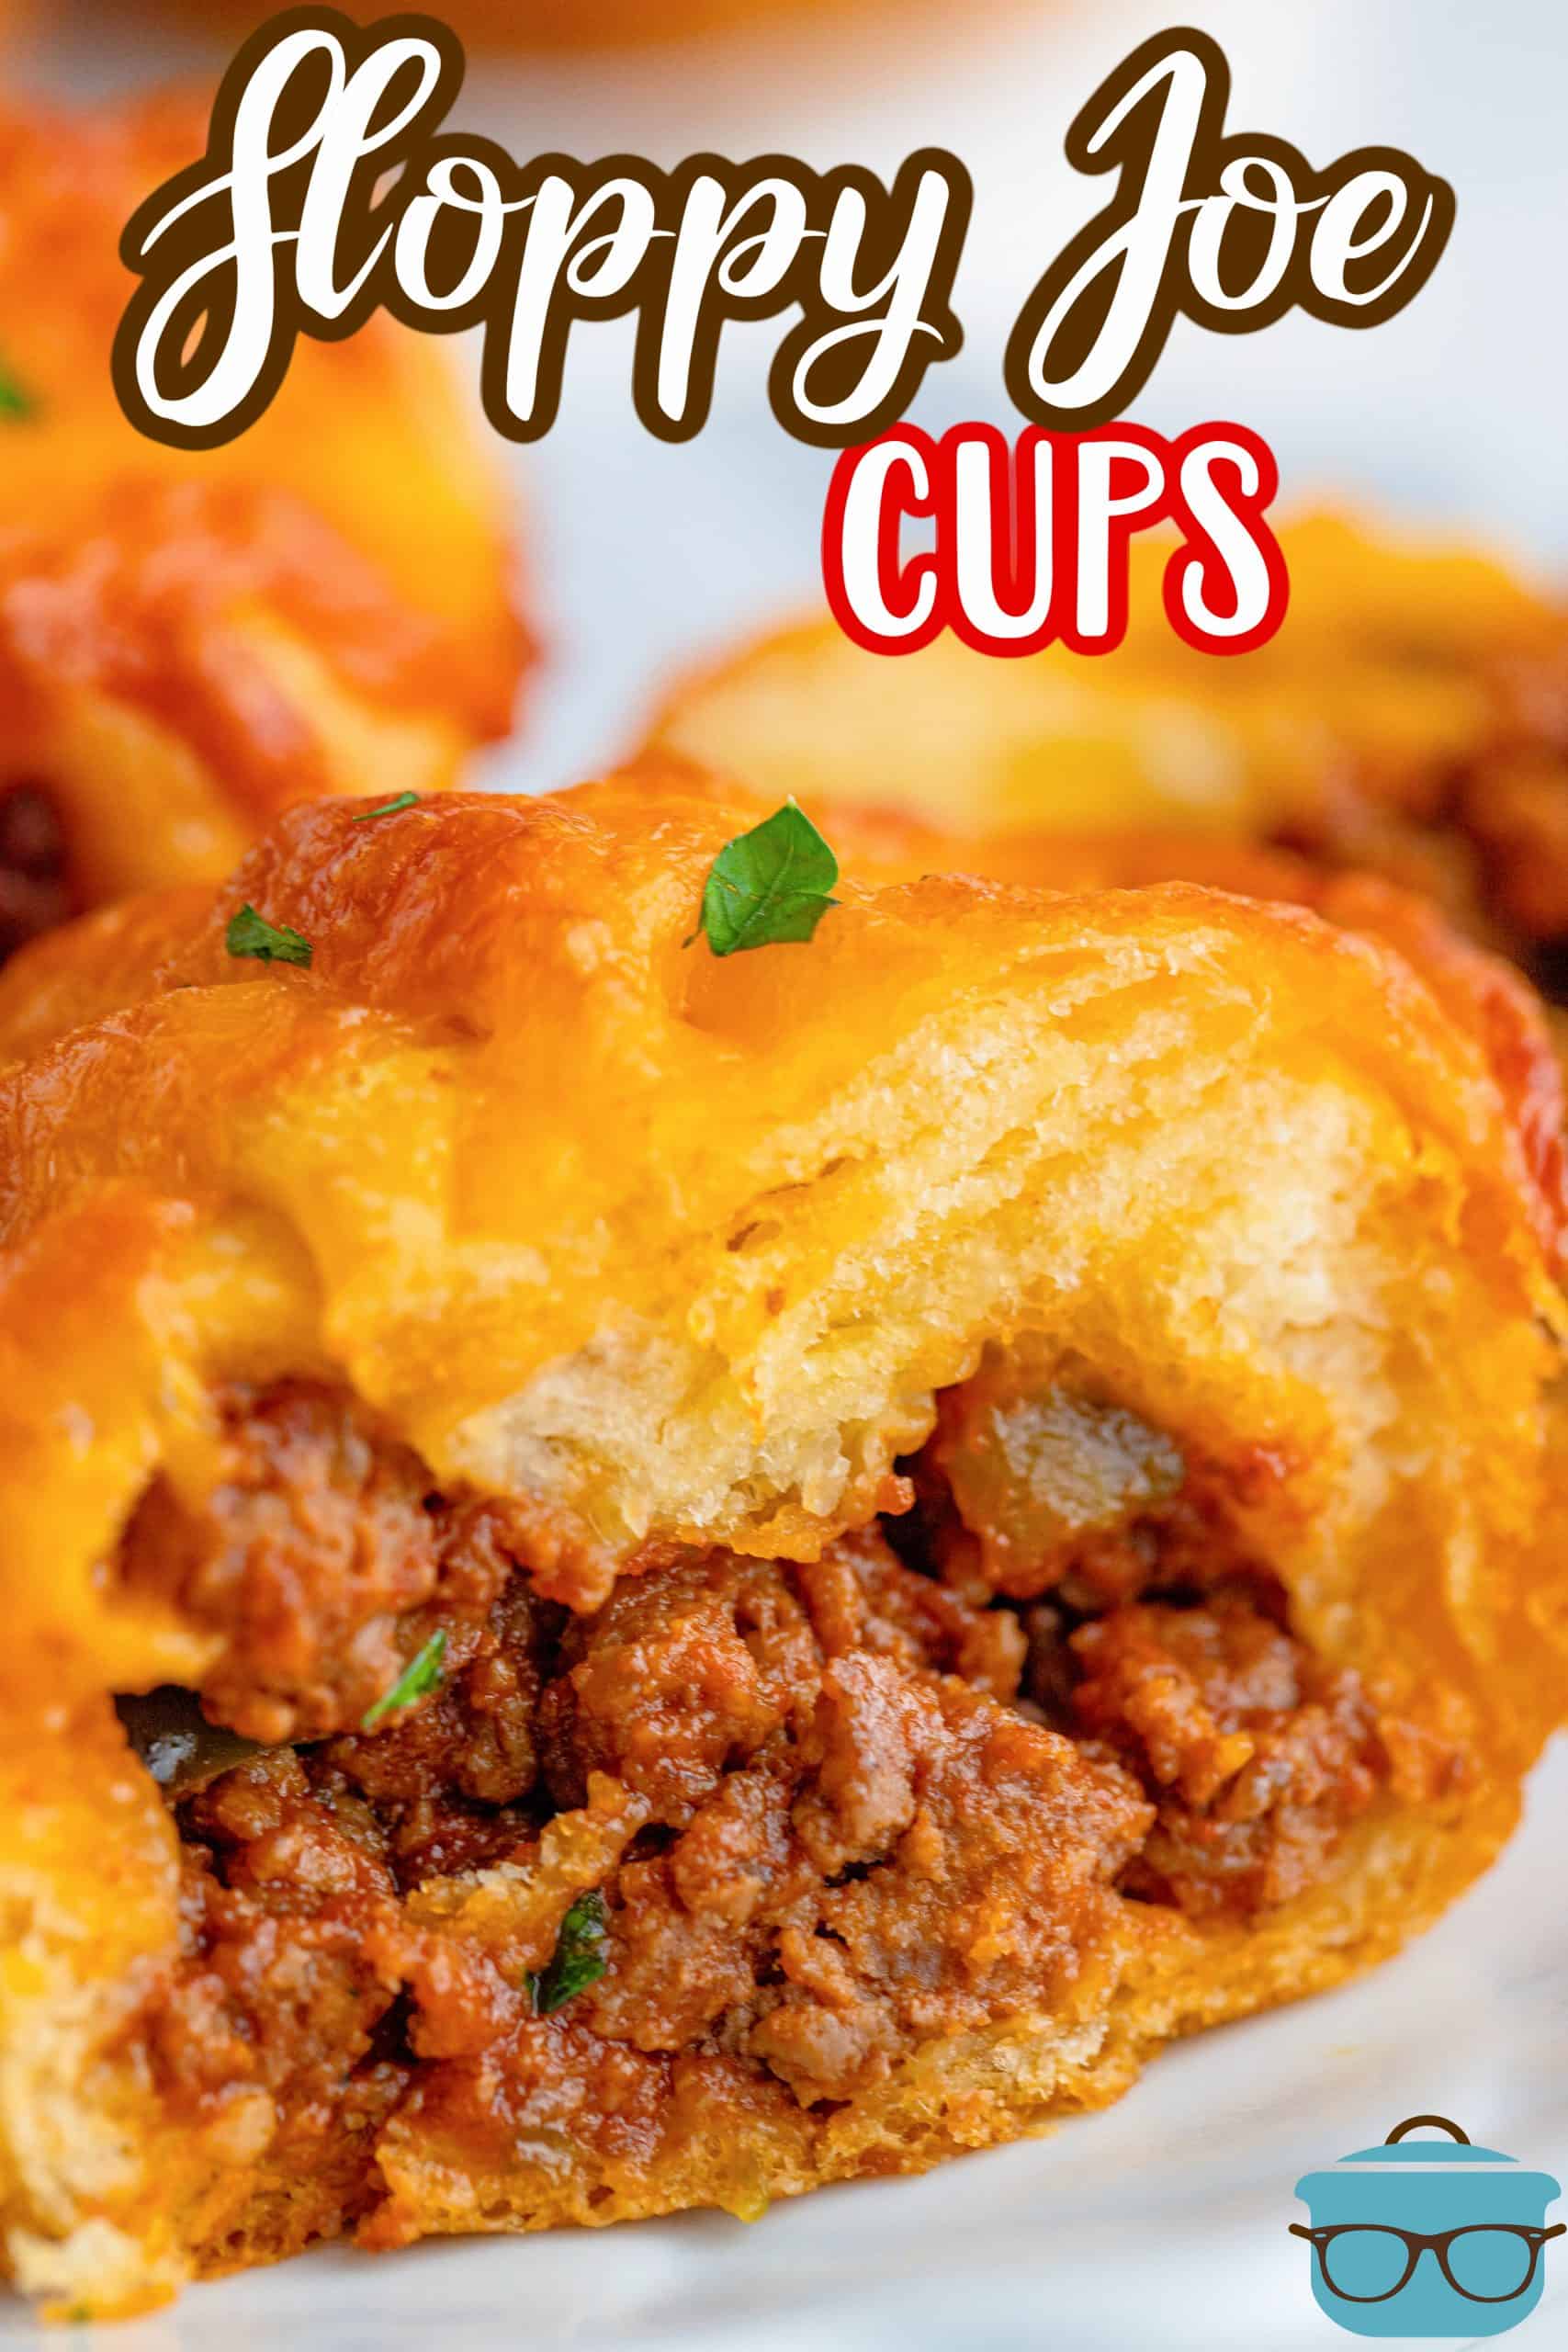 Sloppy Joe Cups on plate with one cut open showing filling.